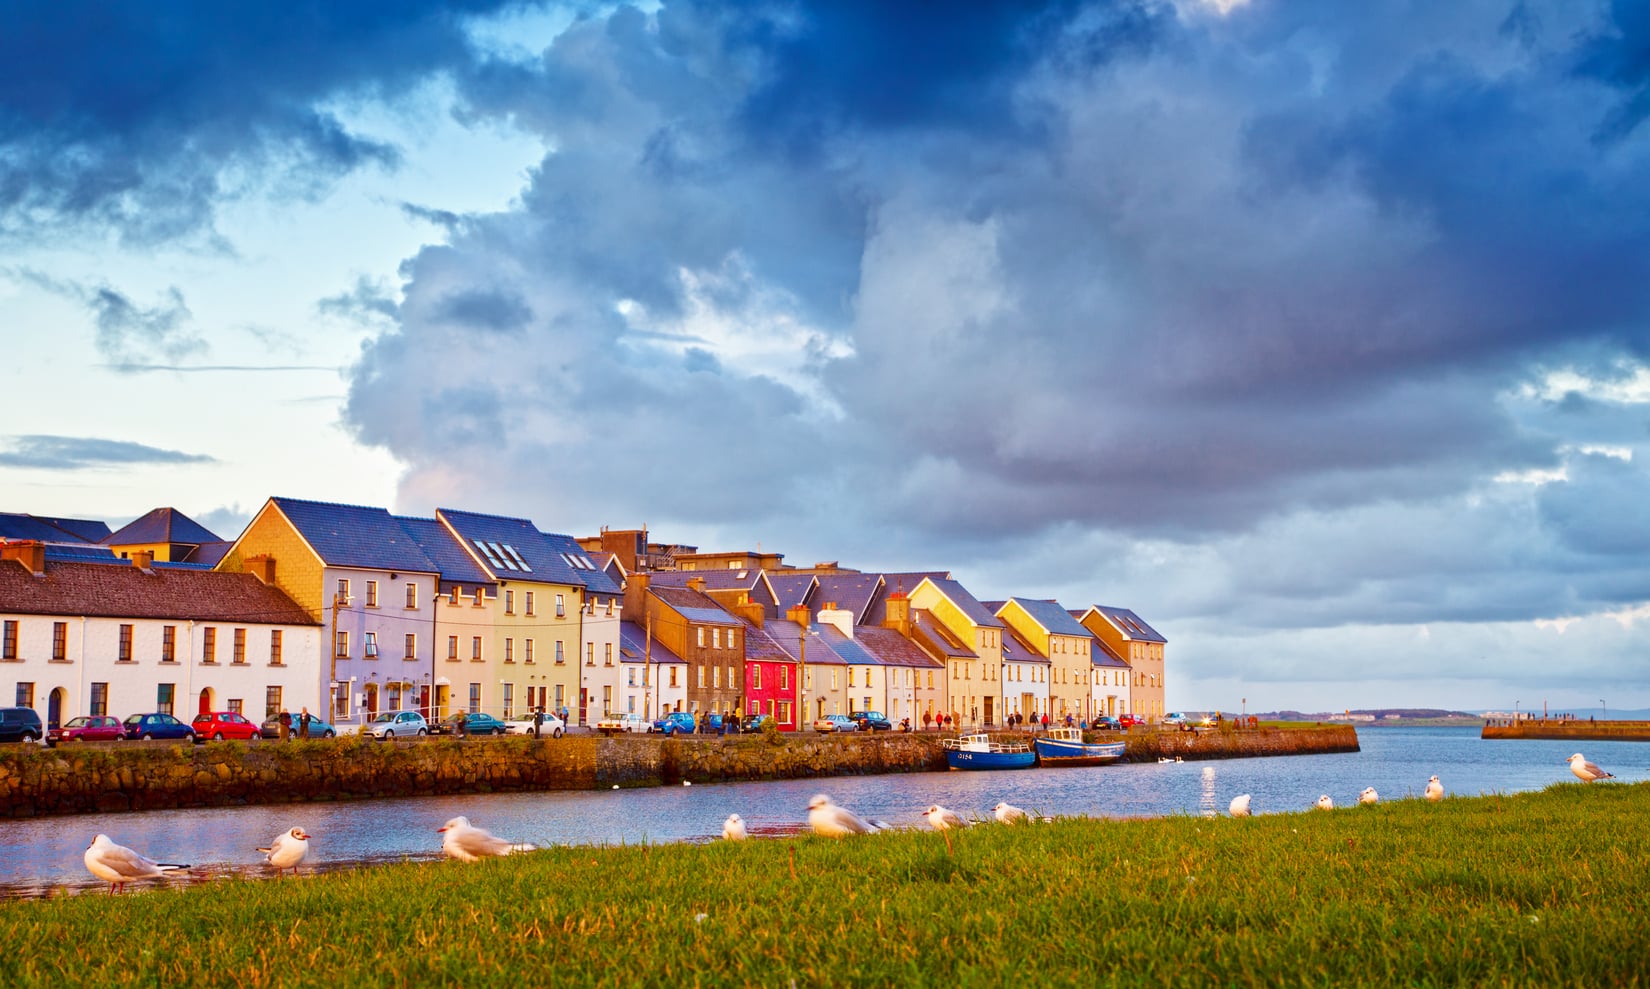 galway tourist guide